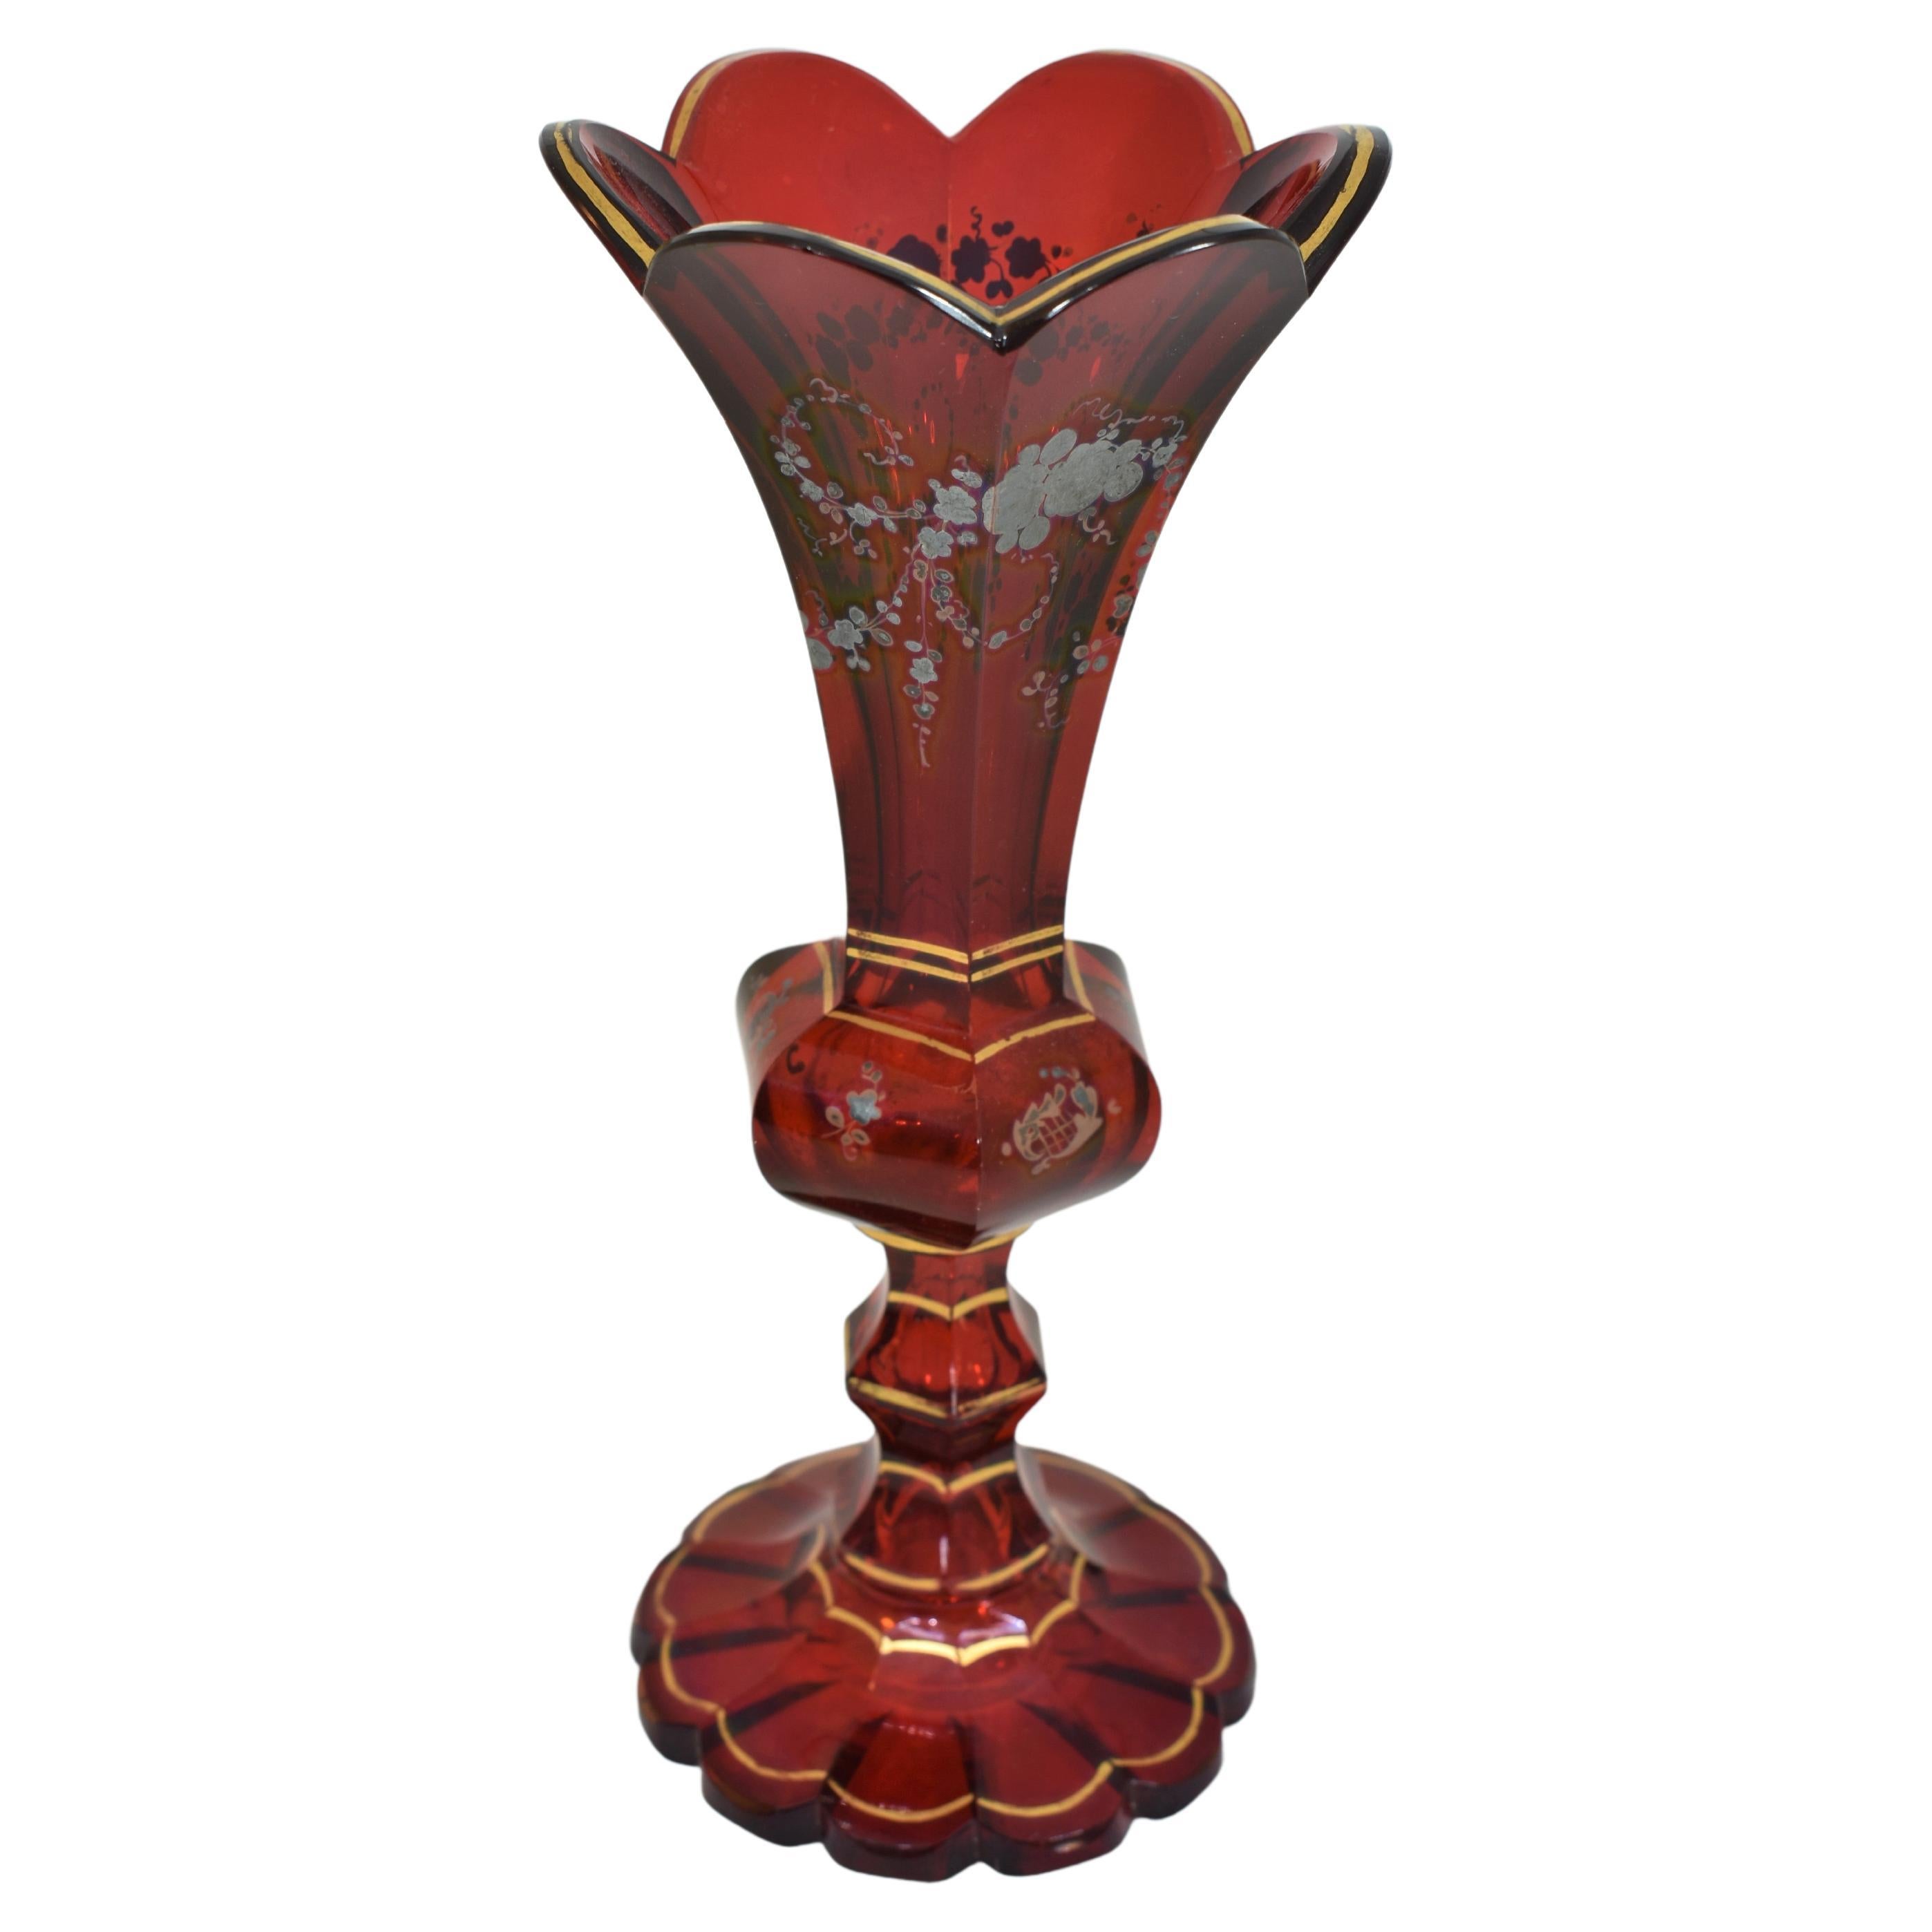 Elegant vase in ruby red glass profusely decorated with gilding and silver enameling decoration, with scalloped gilded rim, standing on a scalloped foot cut with a star pattern underneath.
Bohemia, 19th century
Stands 21 cm high.